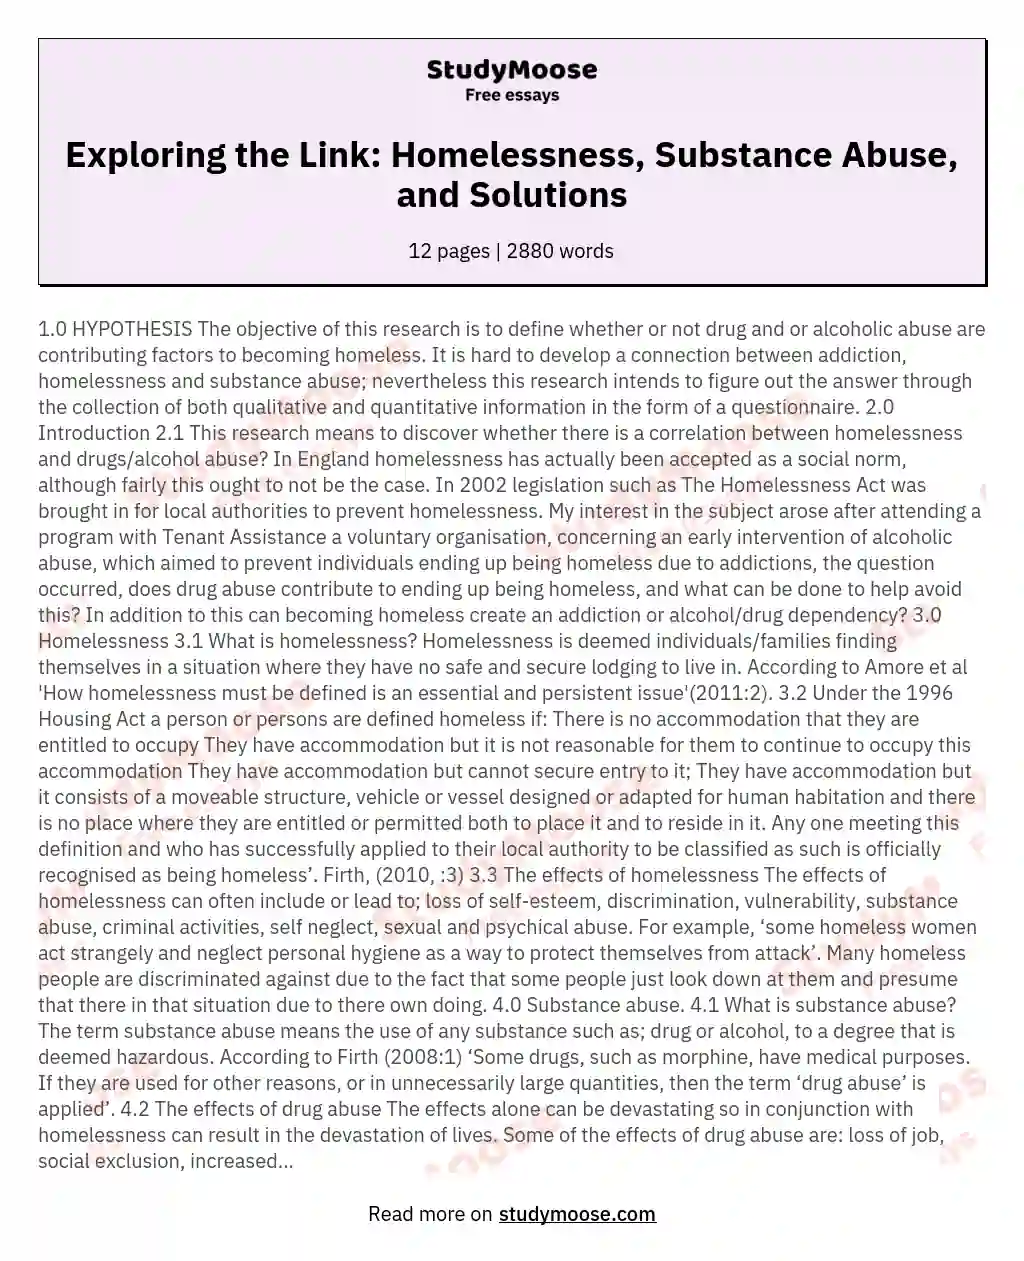 Реферат: The Homeless Essay Research Paper Homelessness is